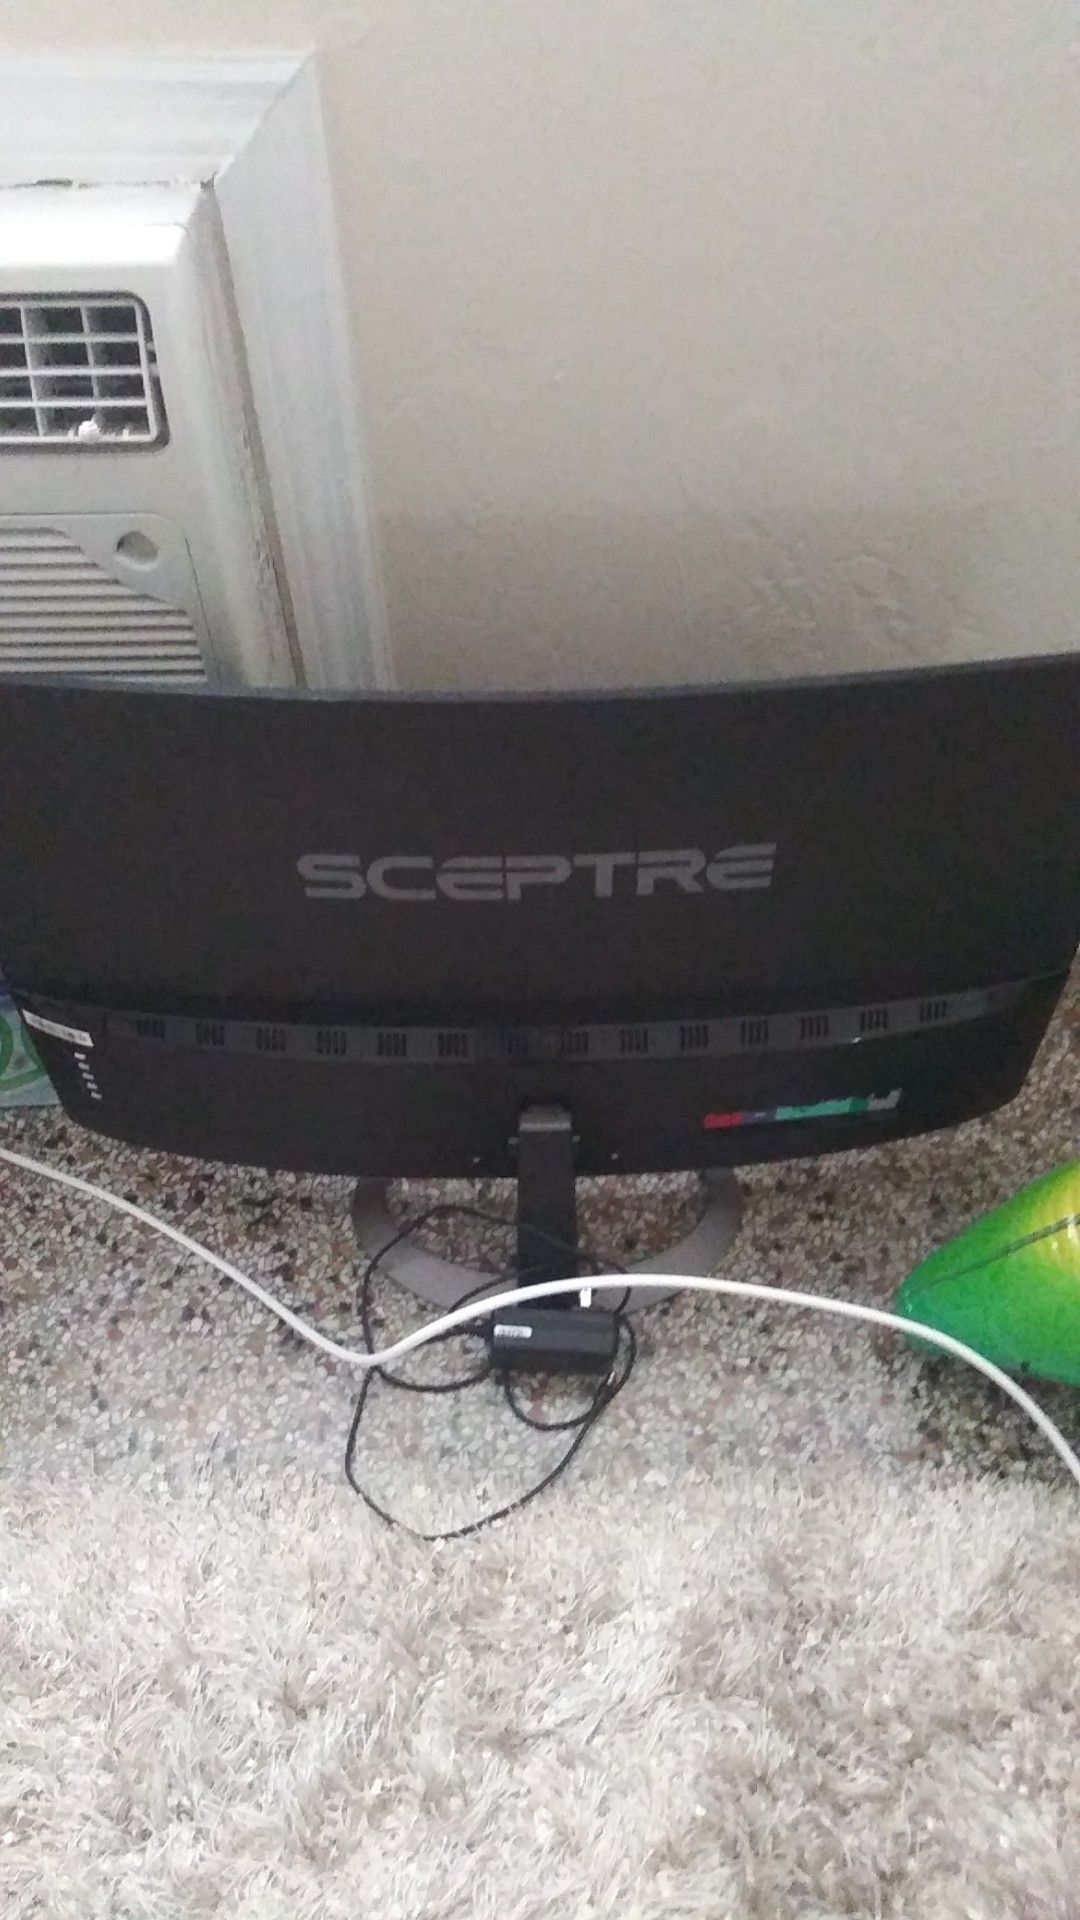 Sceptre 27" Curved 75hz monitor Broken Screen For Parts